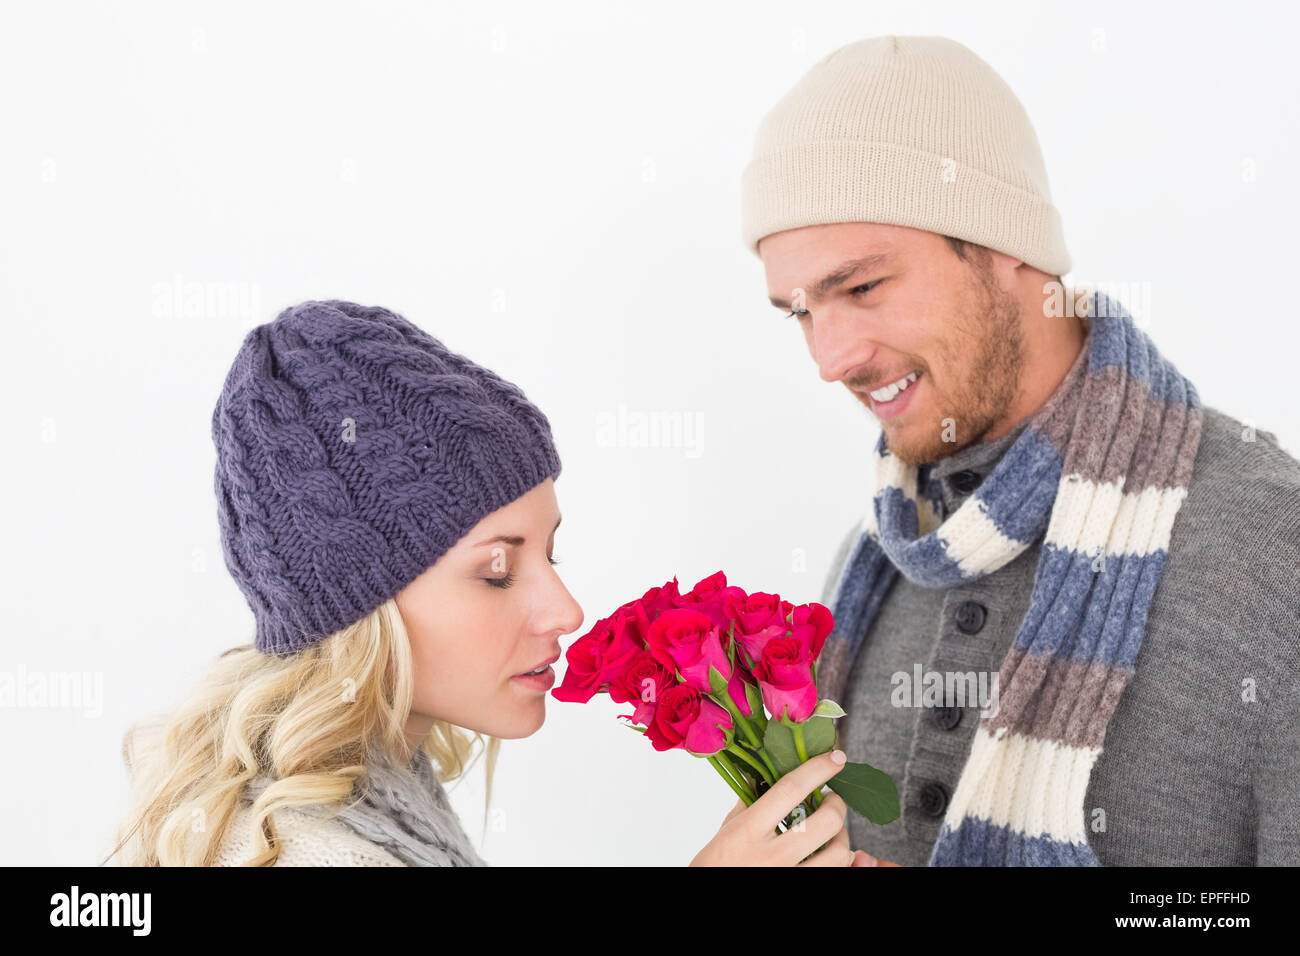 Attractive couple in warm clothing holding flowers Stock Photo